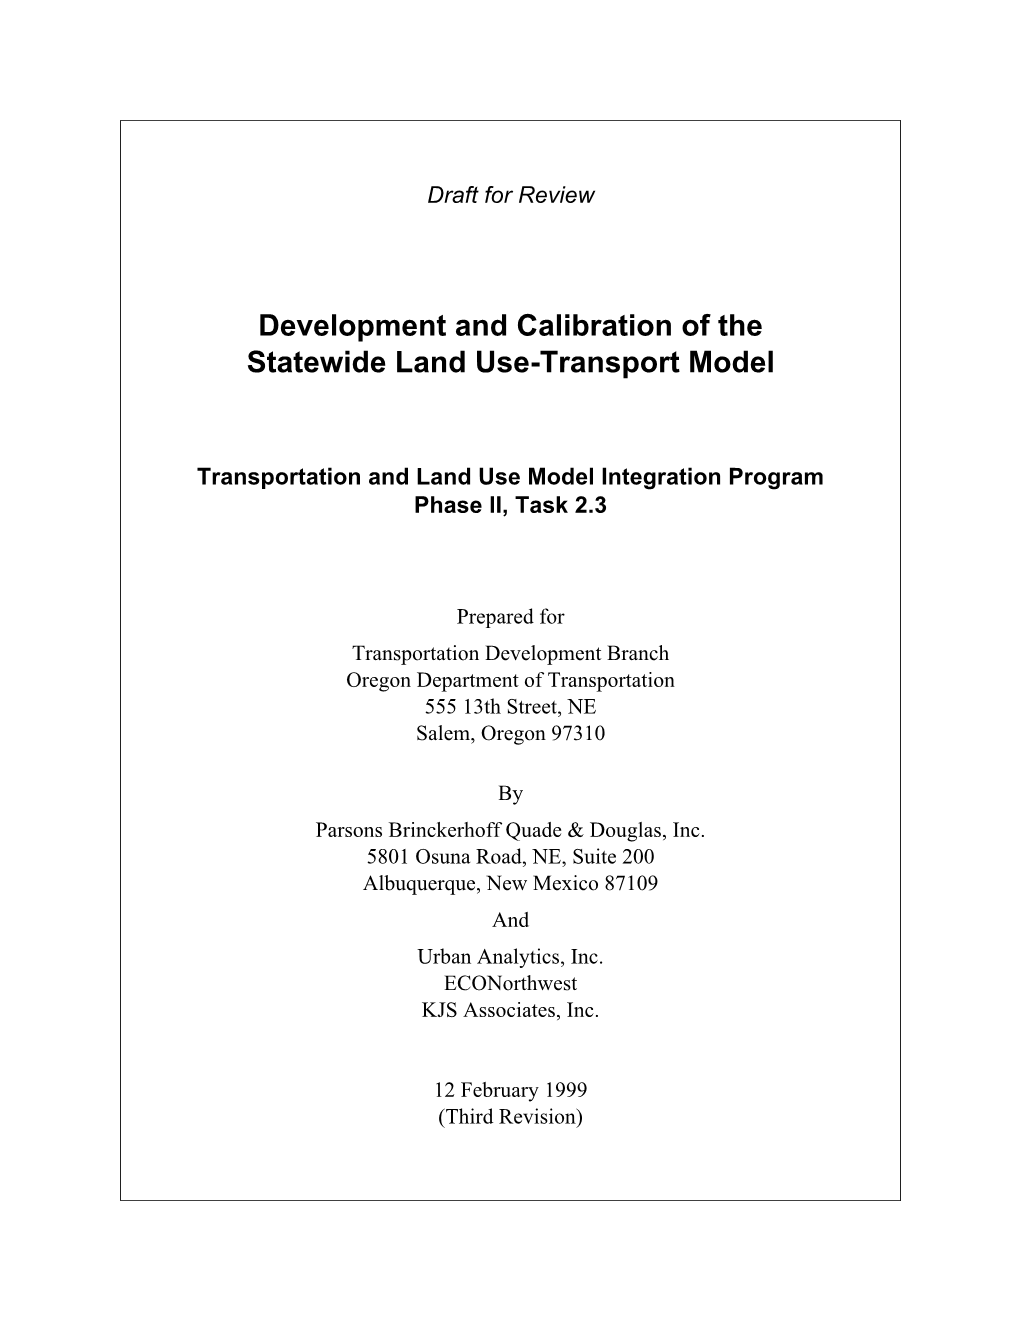 Development and Calibration of the Statewide Land Use-Transport Model